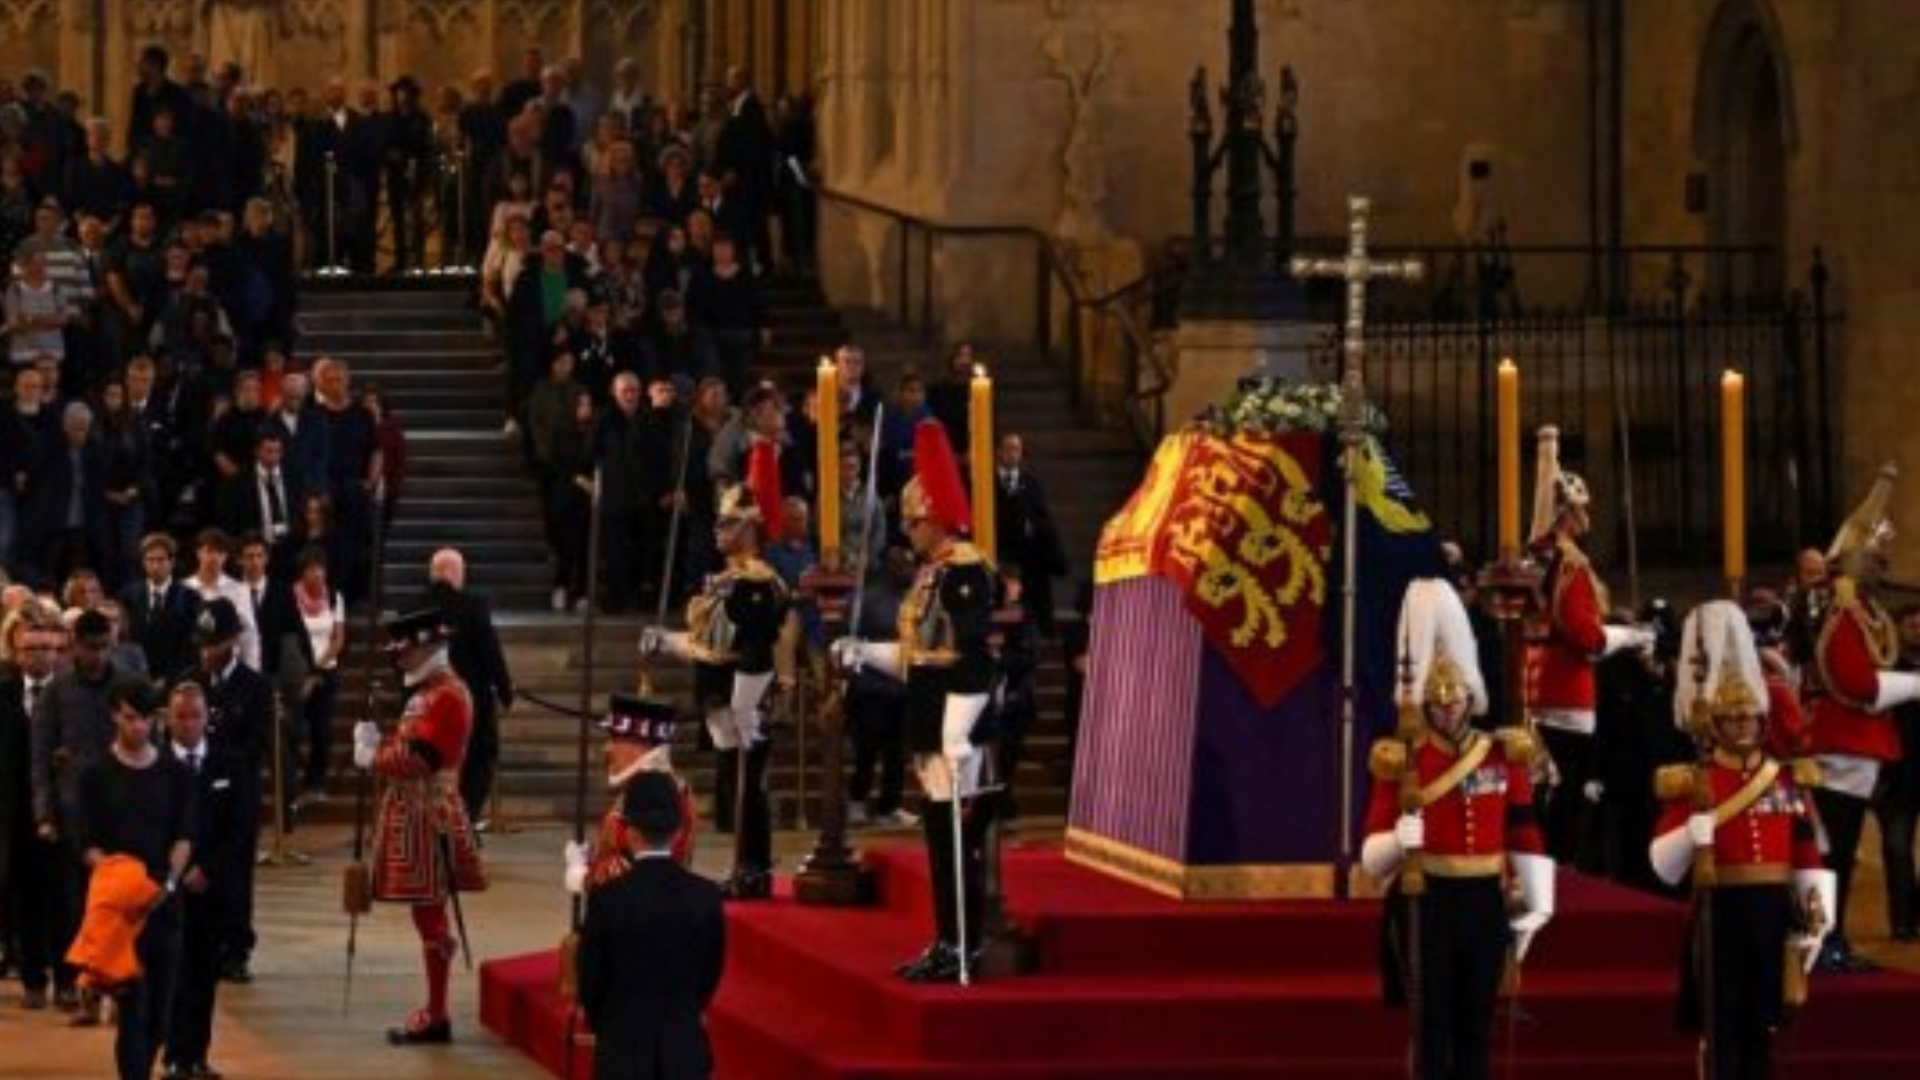 Lines to see Queen Elizabeth II lying in state paused due to capacity limits